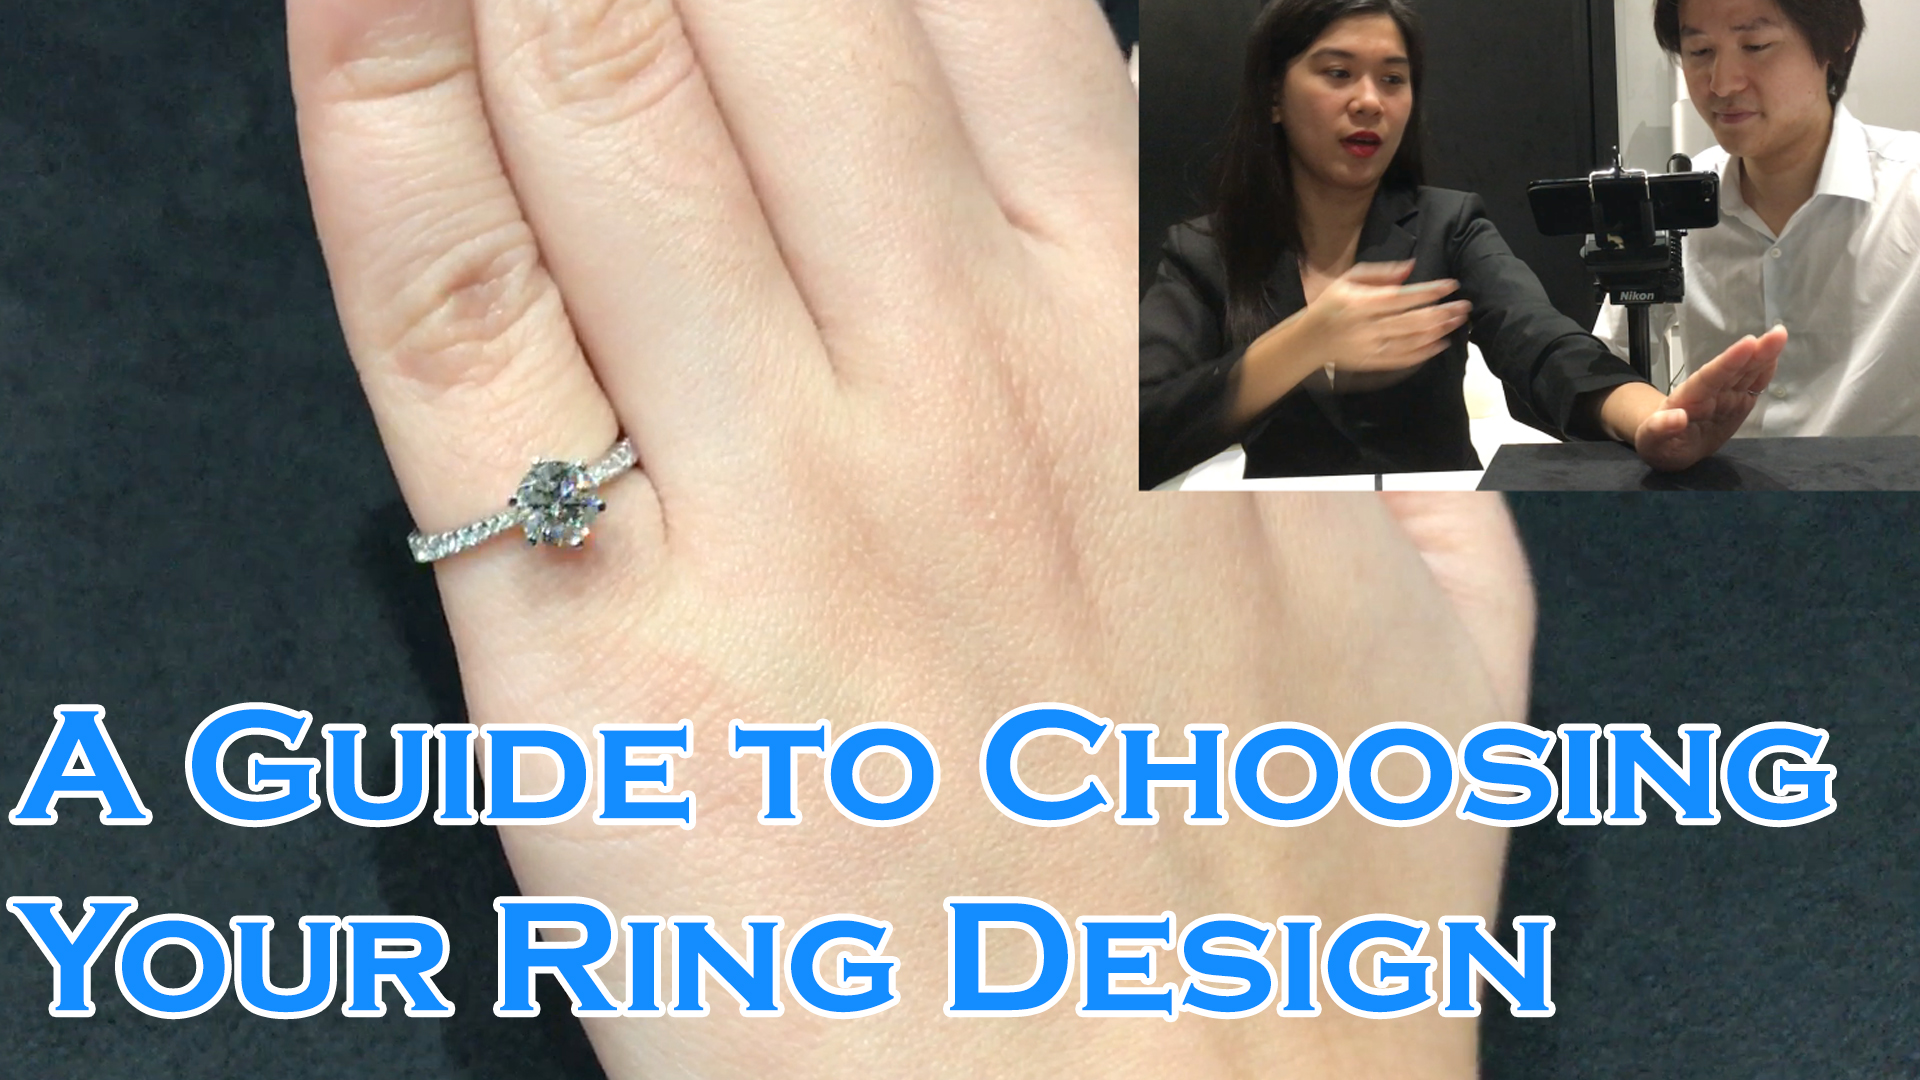 A Guide to Choosing your Diamond Engagement Ring Design |Classic Solitaire, Pave, 4 or 6 Prongs| 